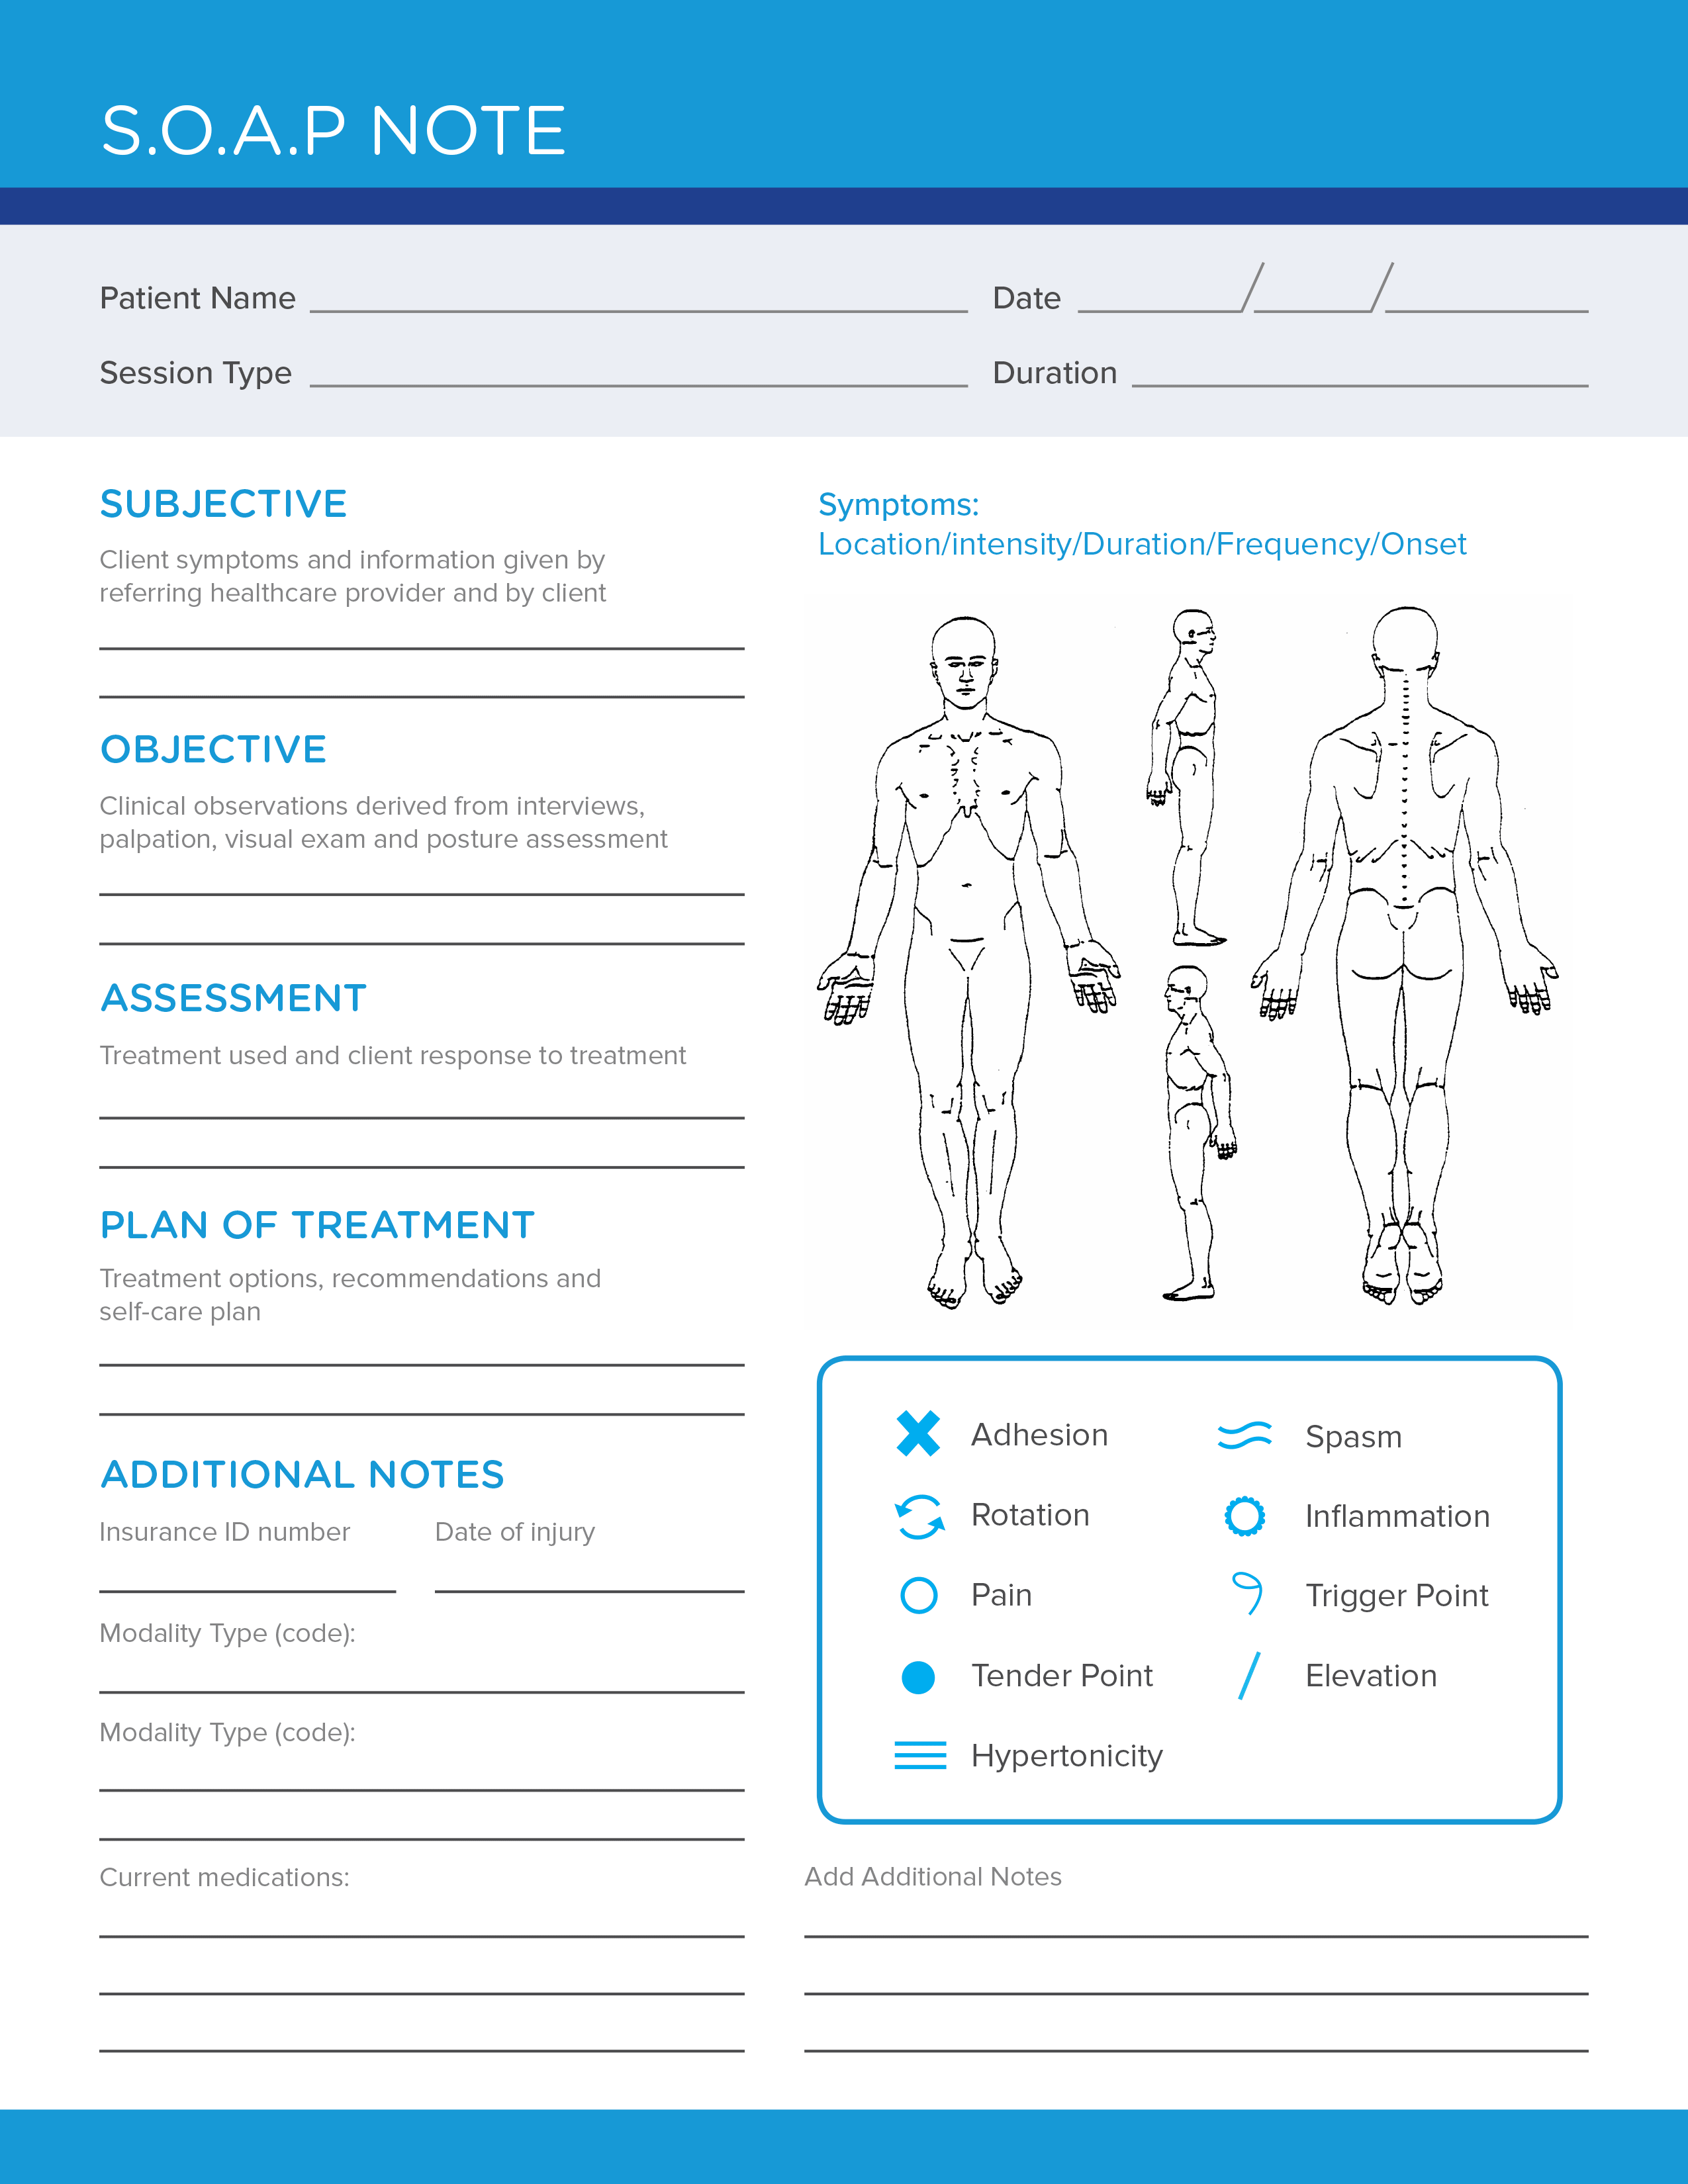 Free SOAP Notes Template - CareCloud Continuum